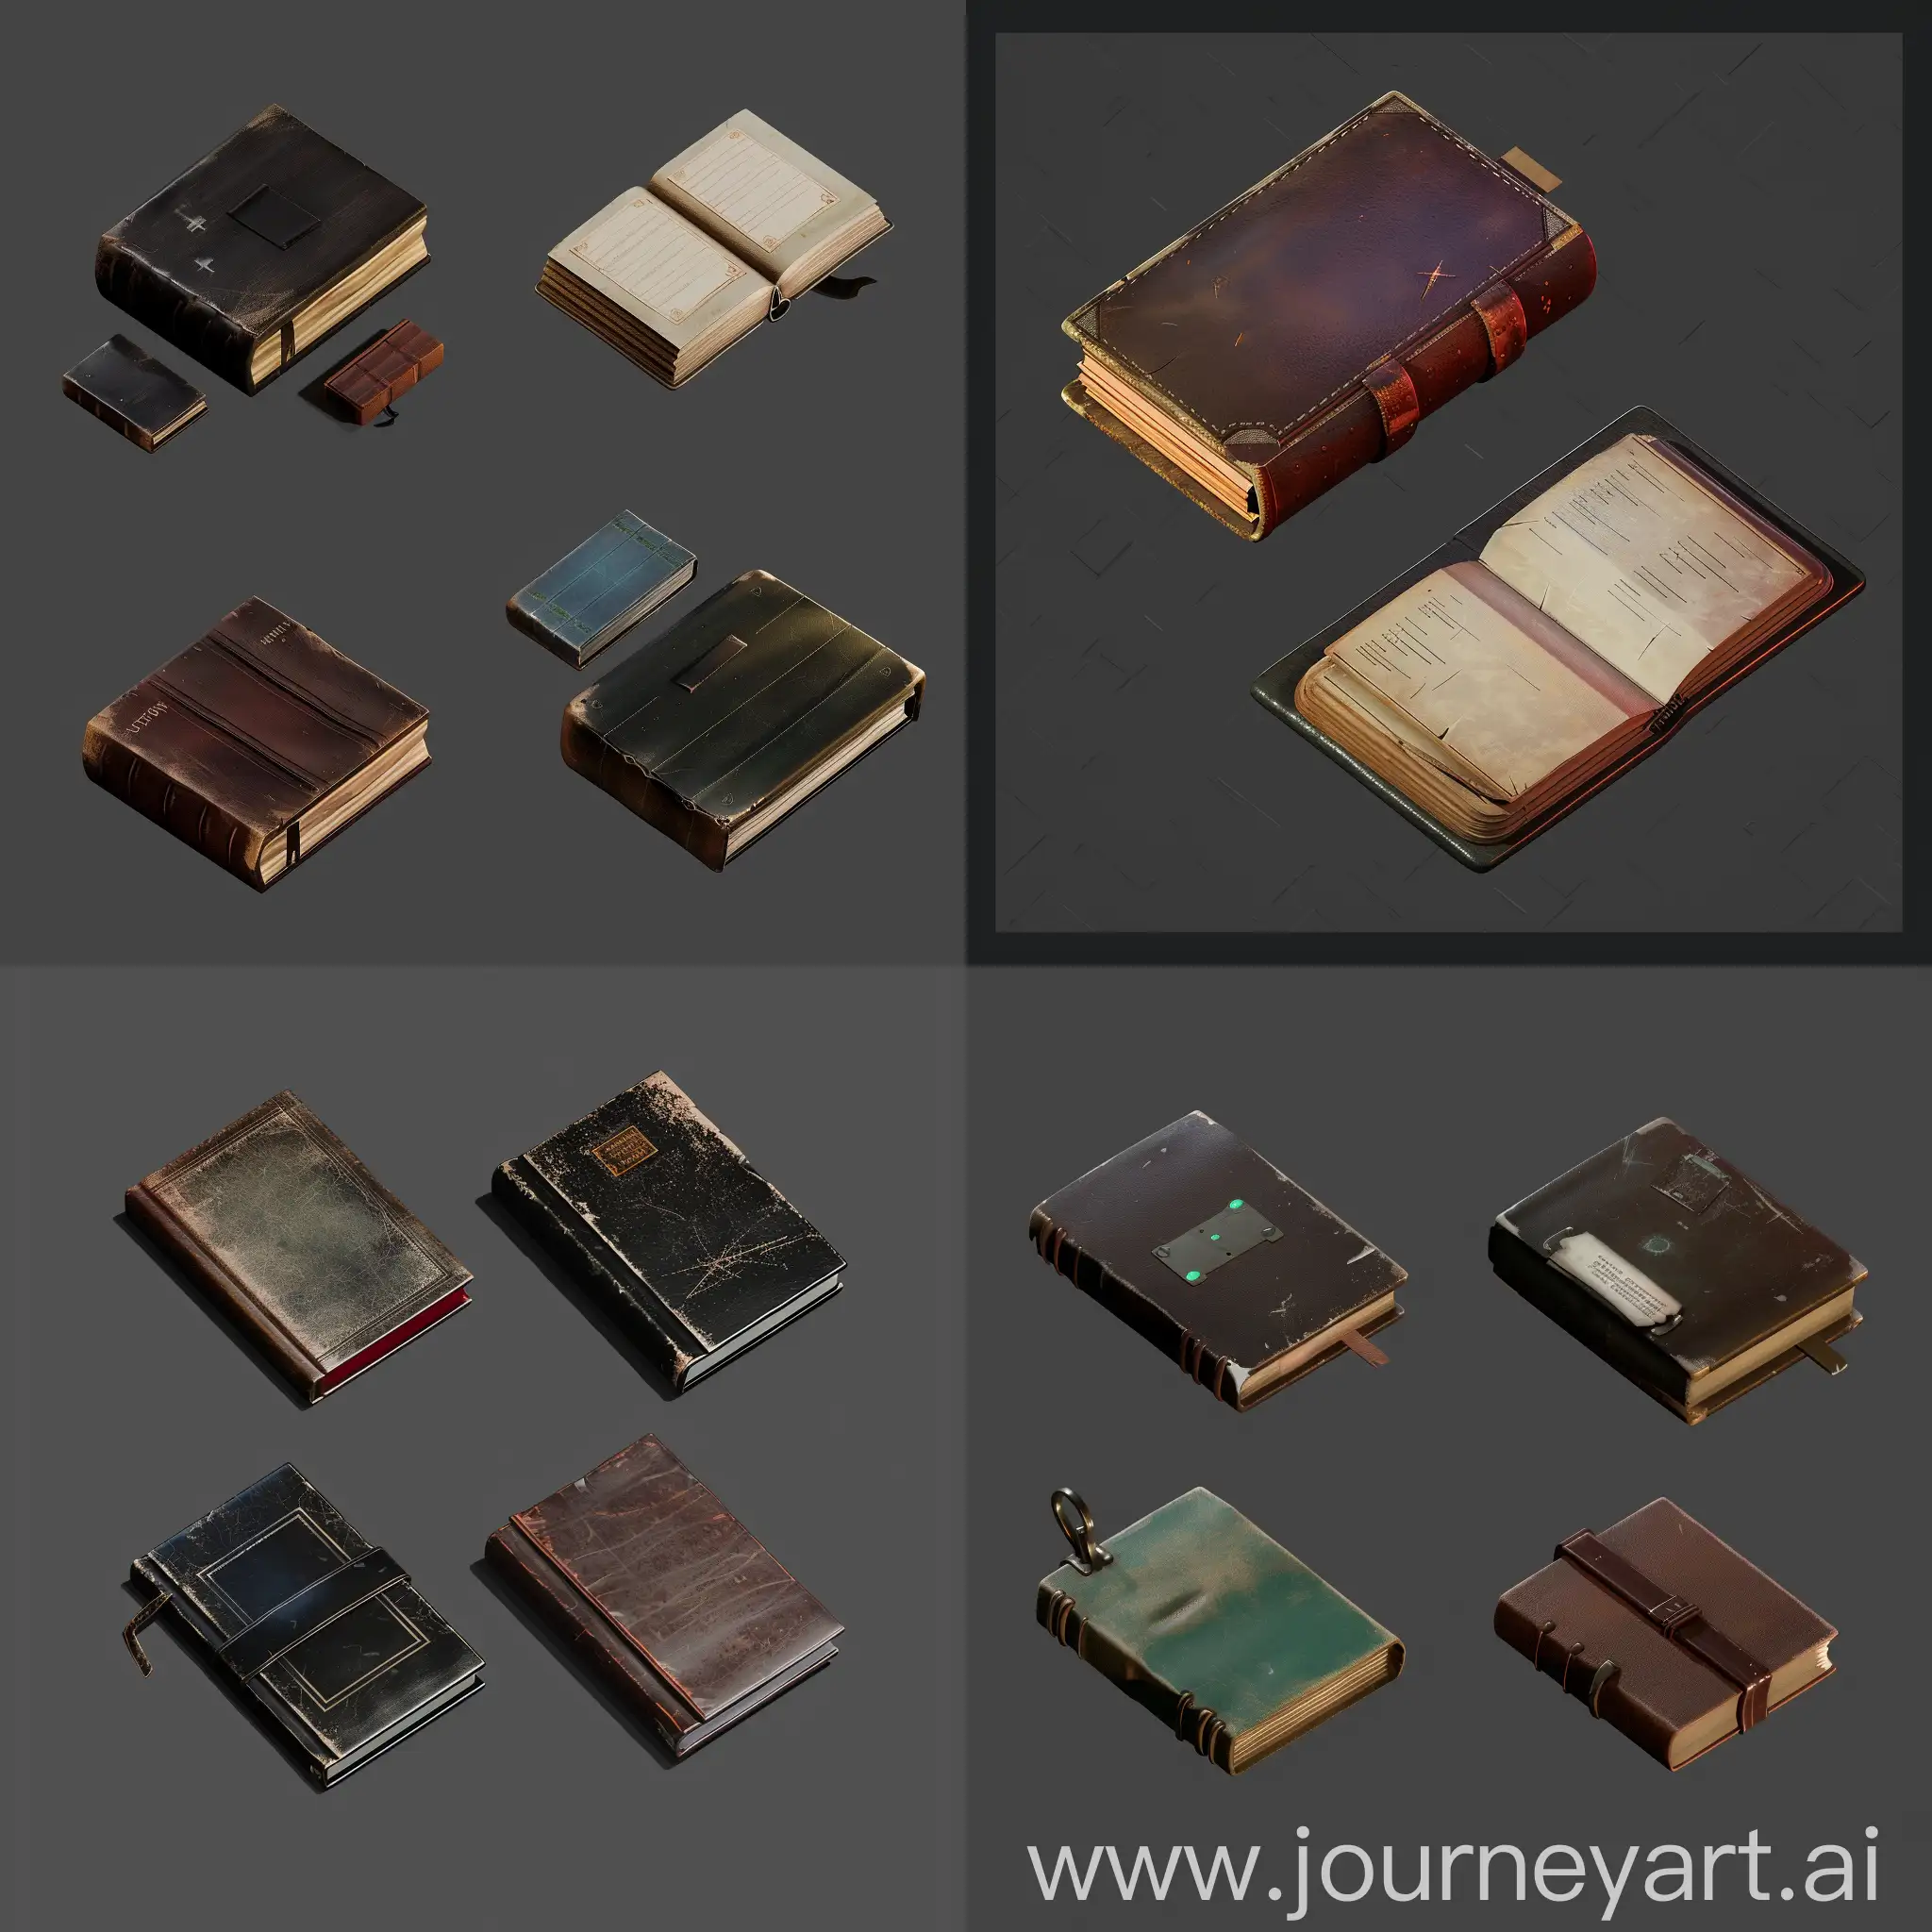 Isometric-Old-Worn-Book-with-Leather-Cover-Realistic-3D-Game-Asset